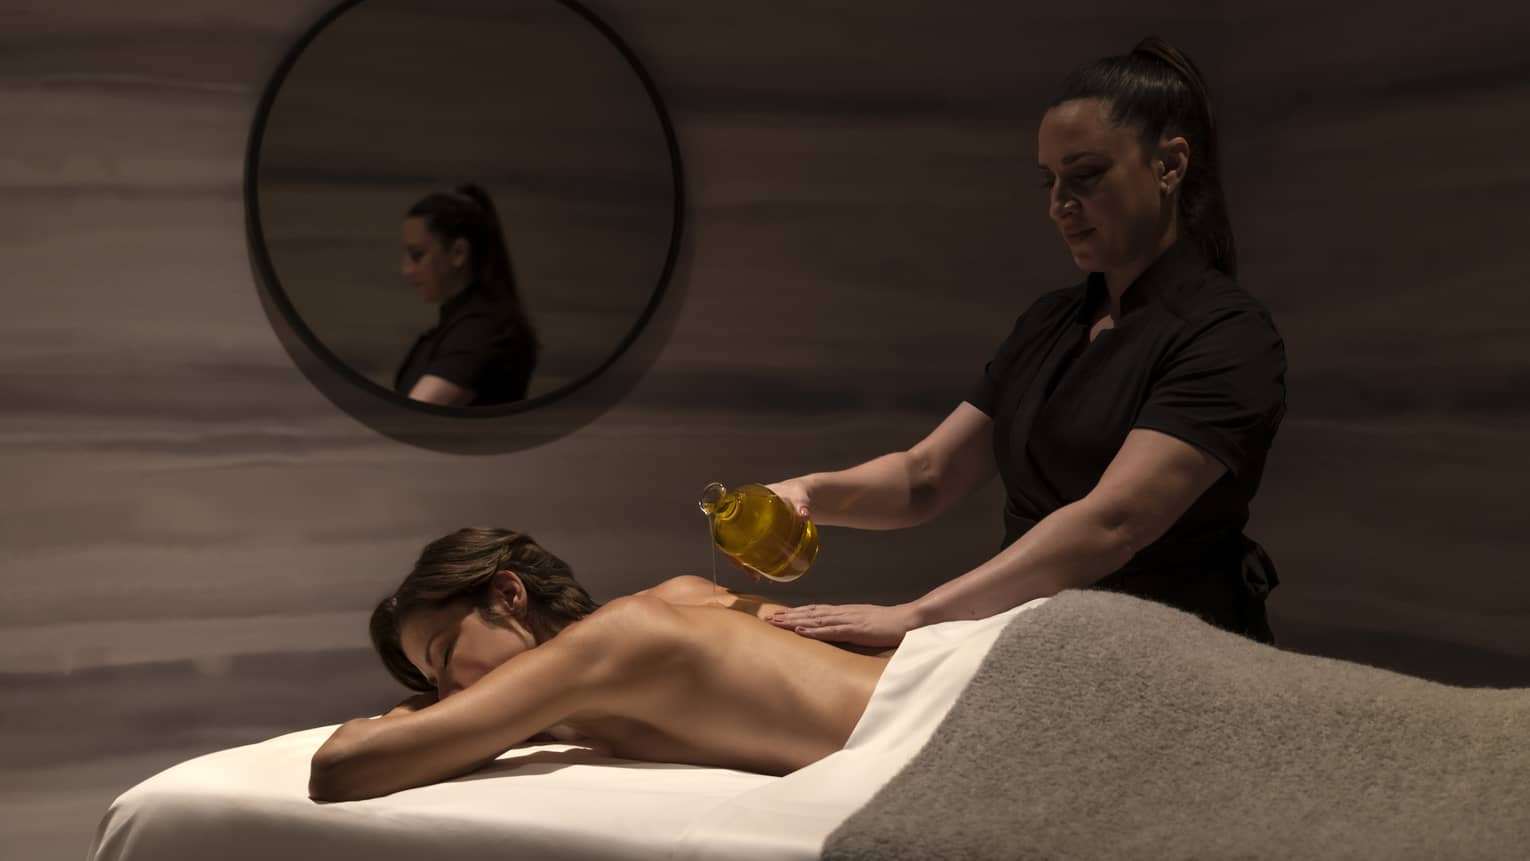 A woman getting a massage in a dimly lit room.